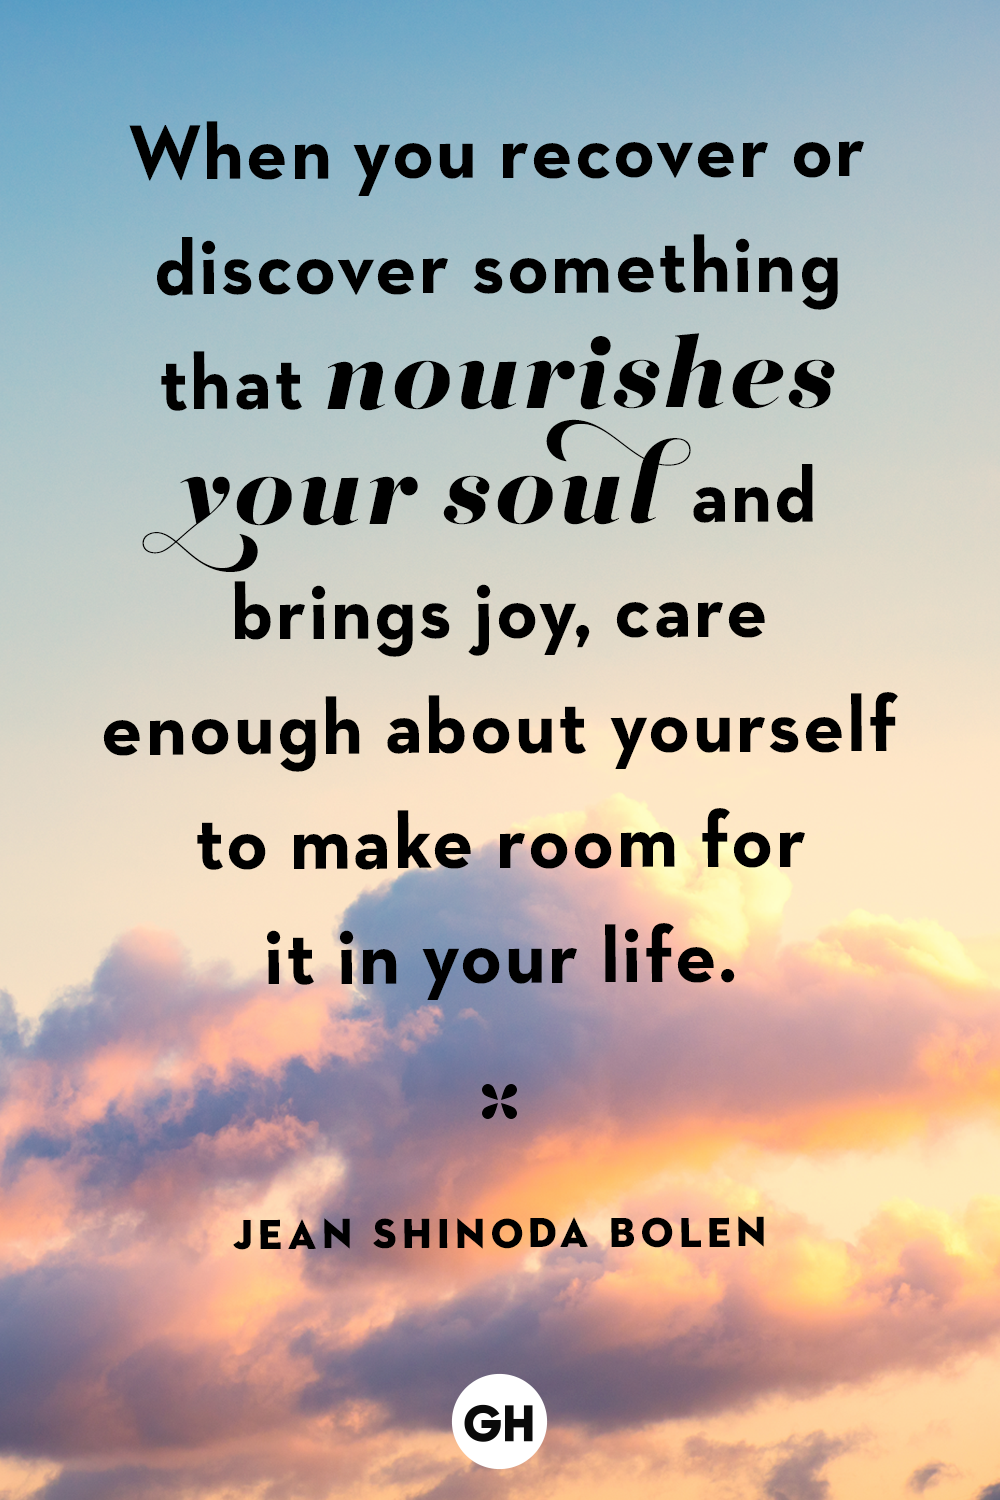 when you recover or discover something that nourishes your soul and brings joy, care enough about yourself to make room for it in your life